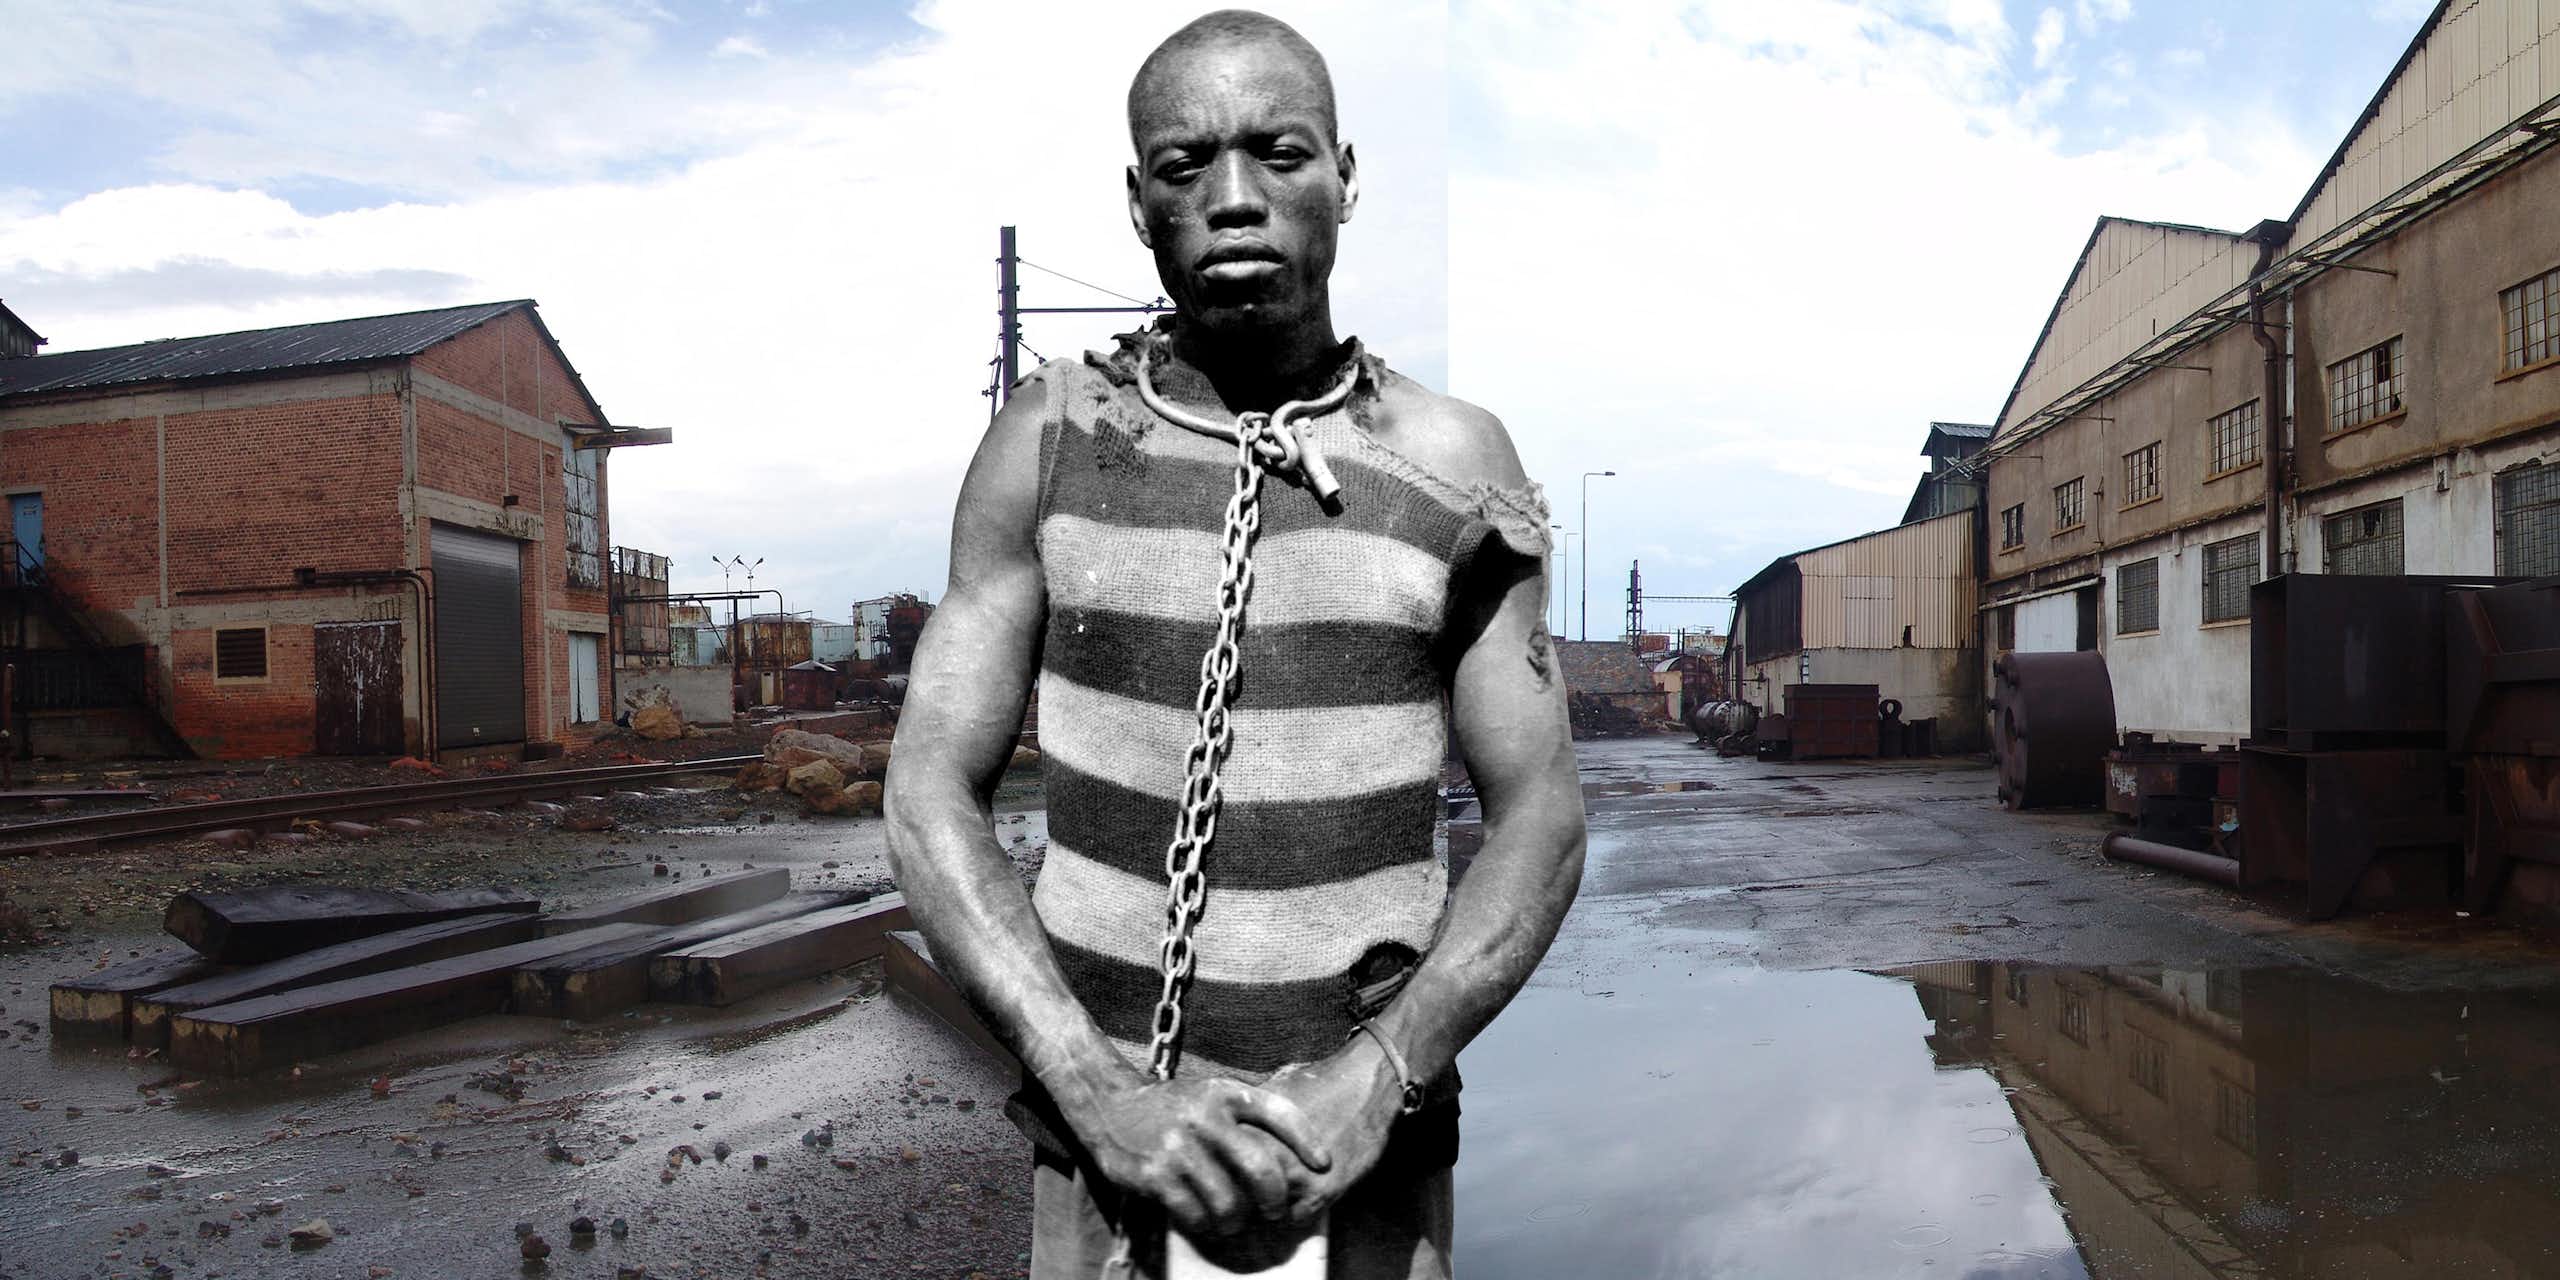 A man in a torn prison top with a shackle around his neck stands in a puddle of water, next to a buildings and railway line.